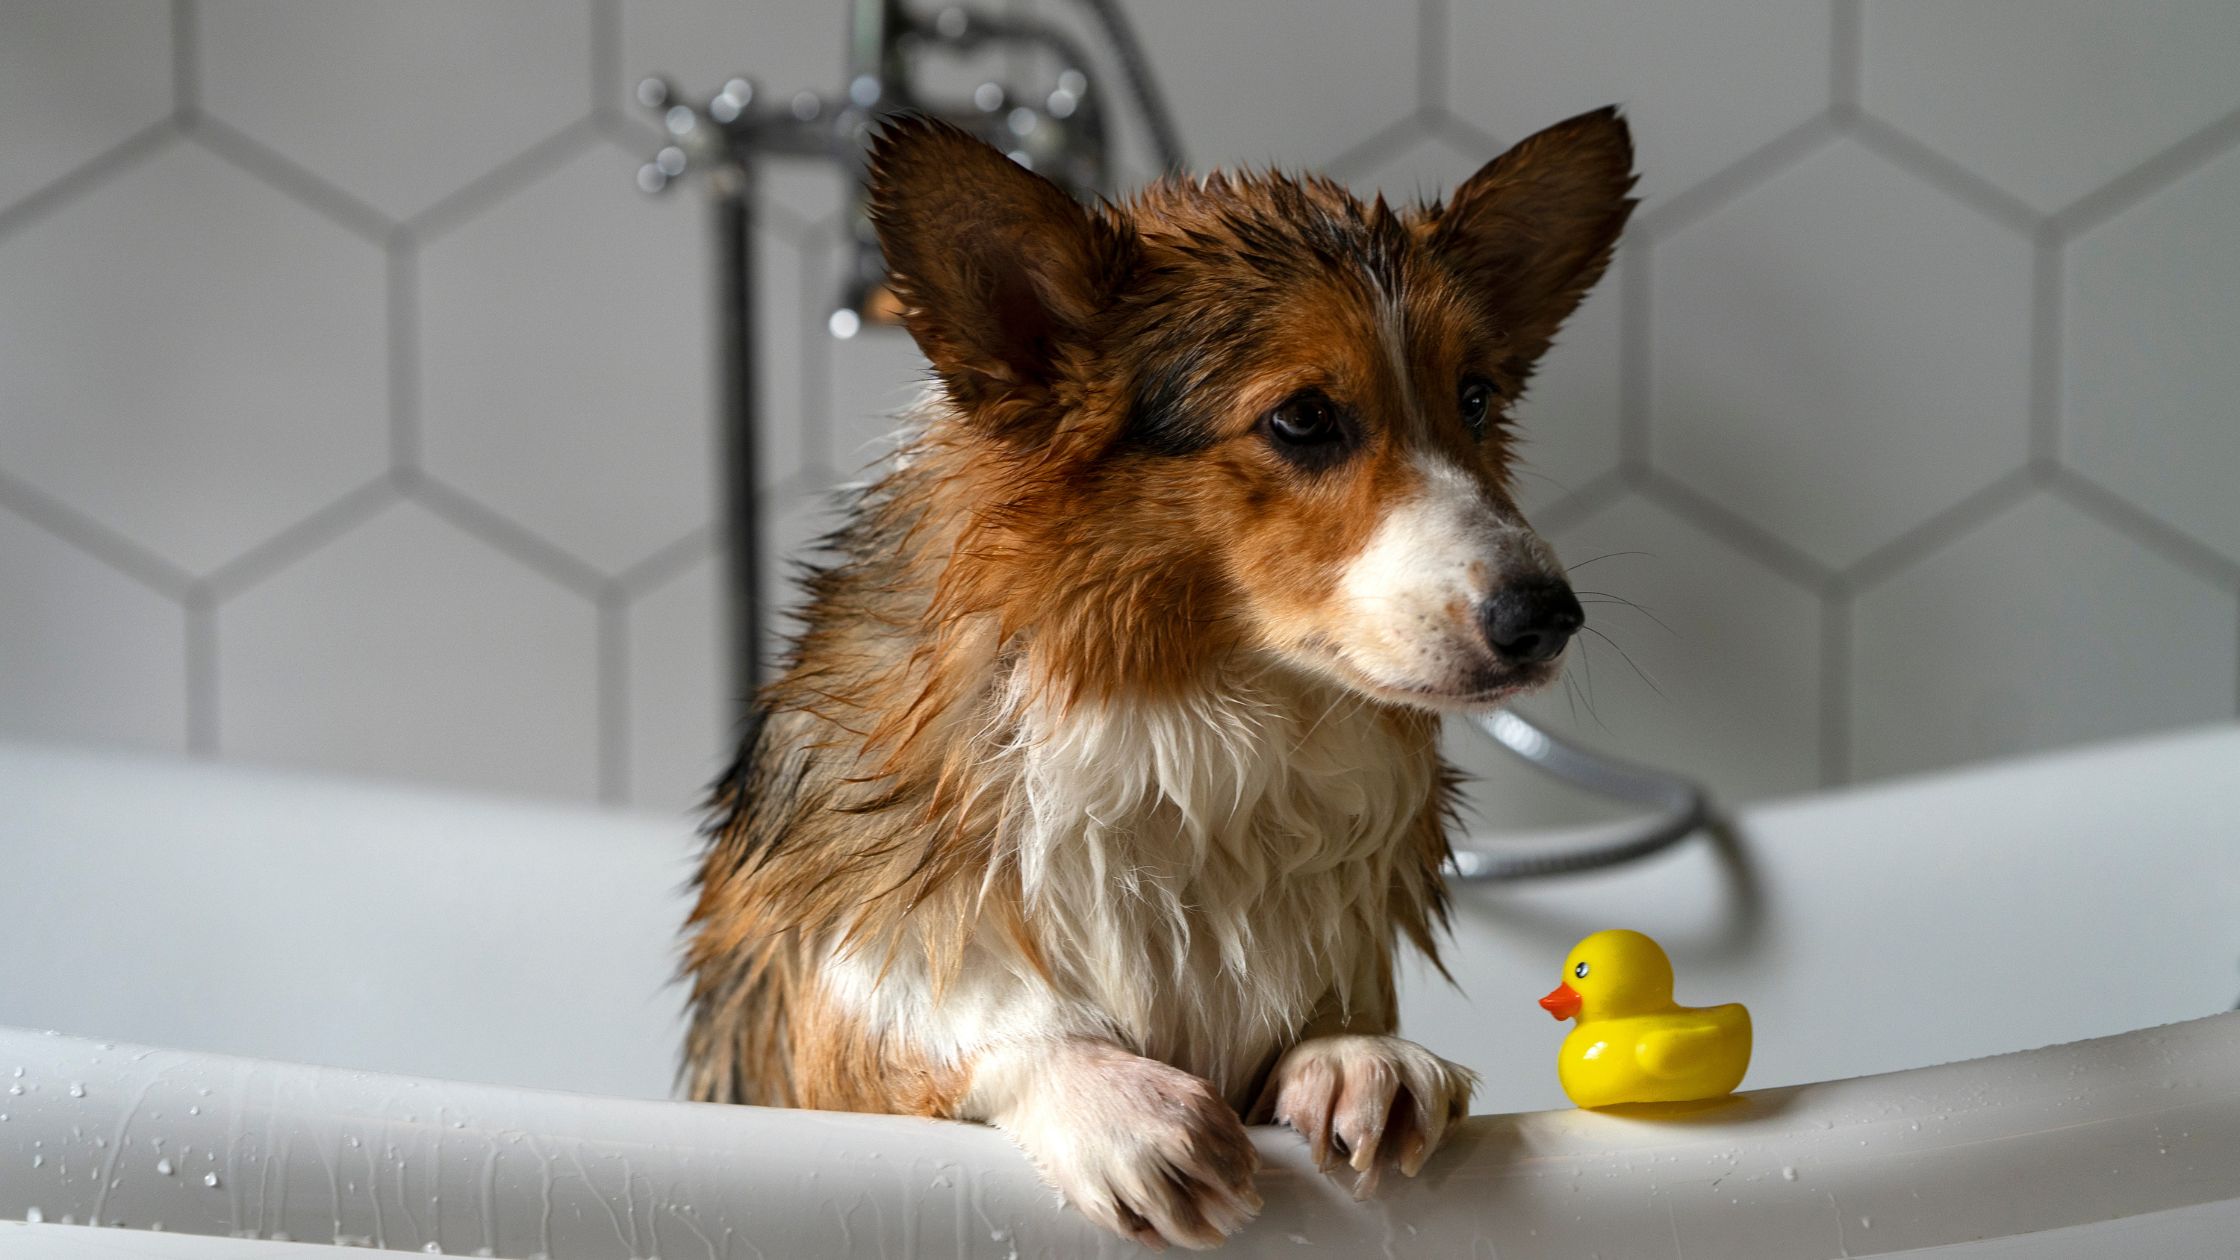 GUIDE TO DOG HYGIENE